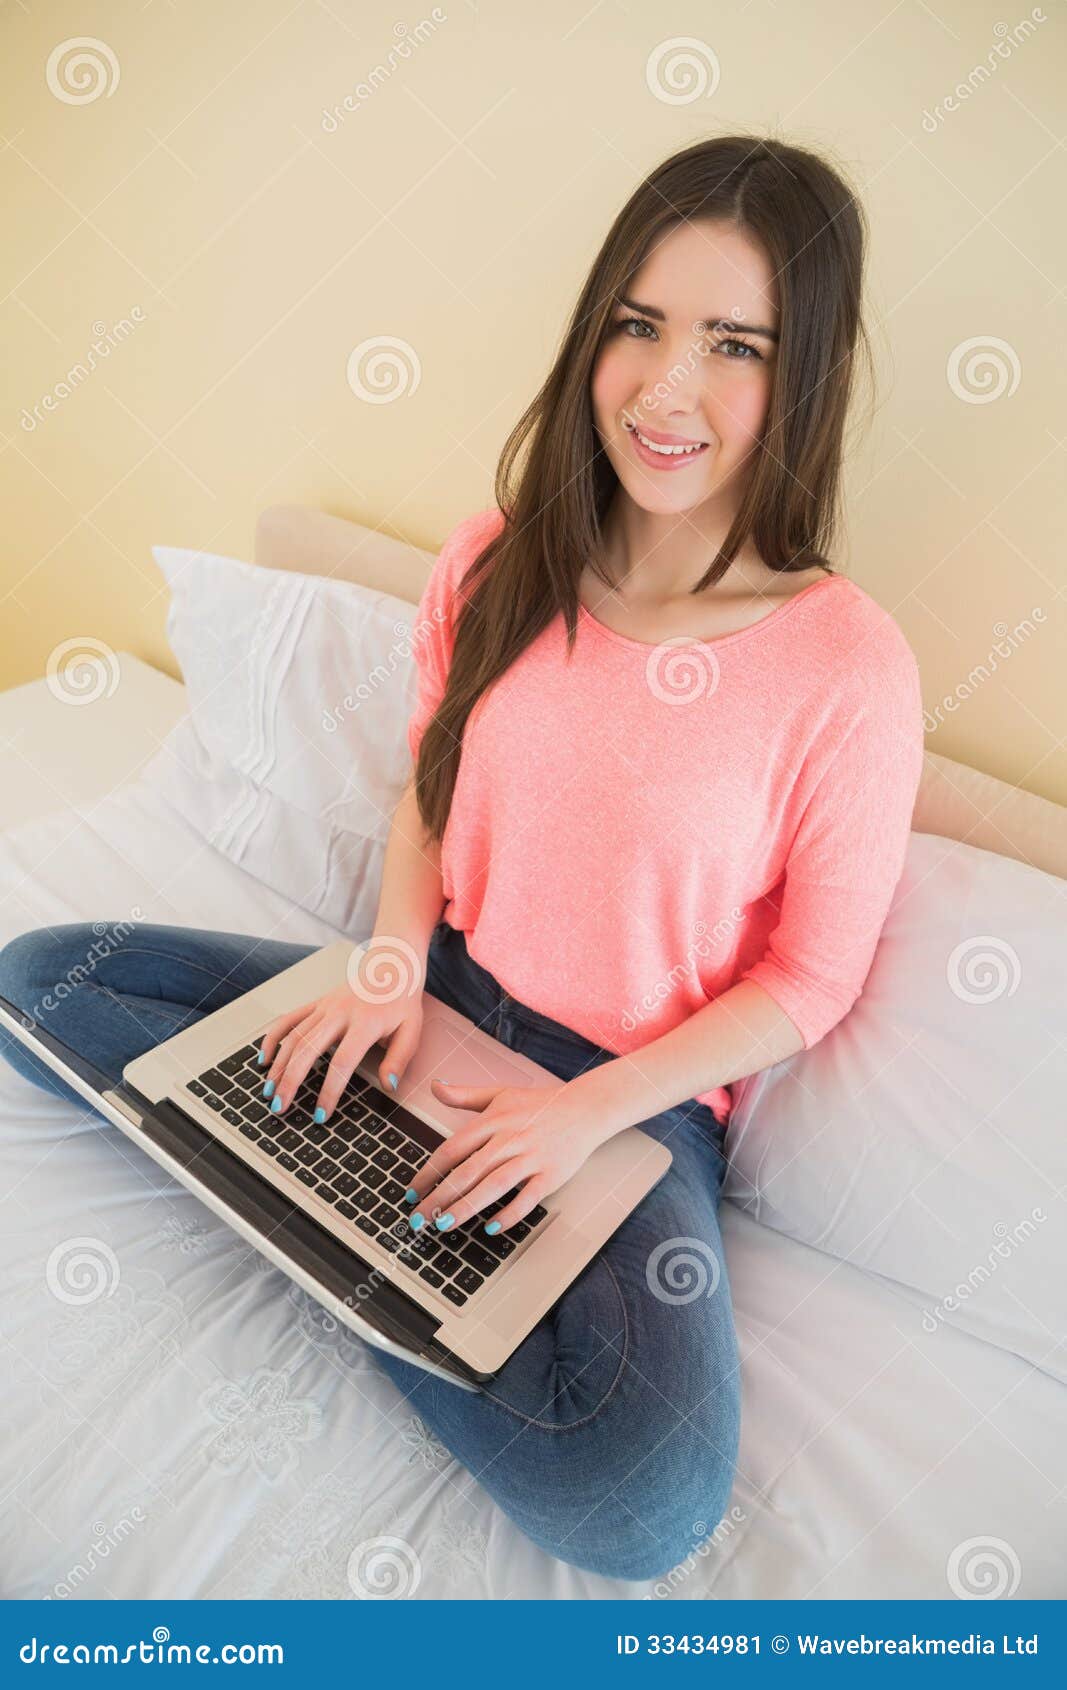 Content Girl With Mockup Pencil Stock Image - Image of 